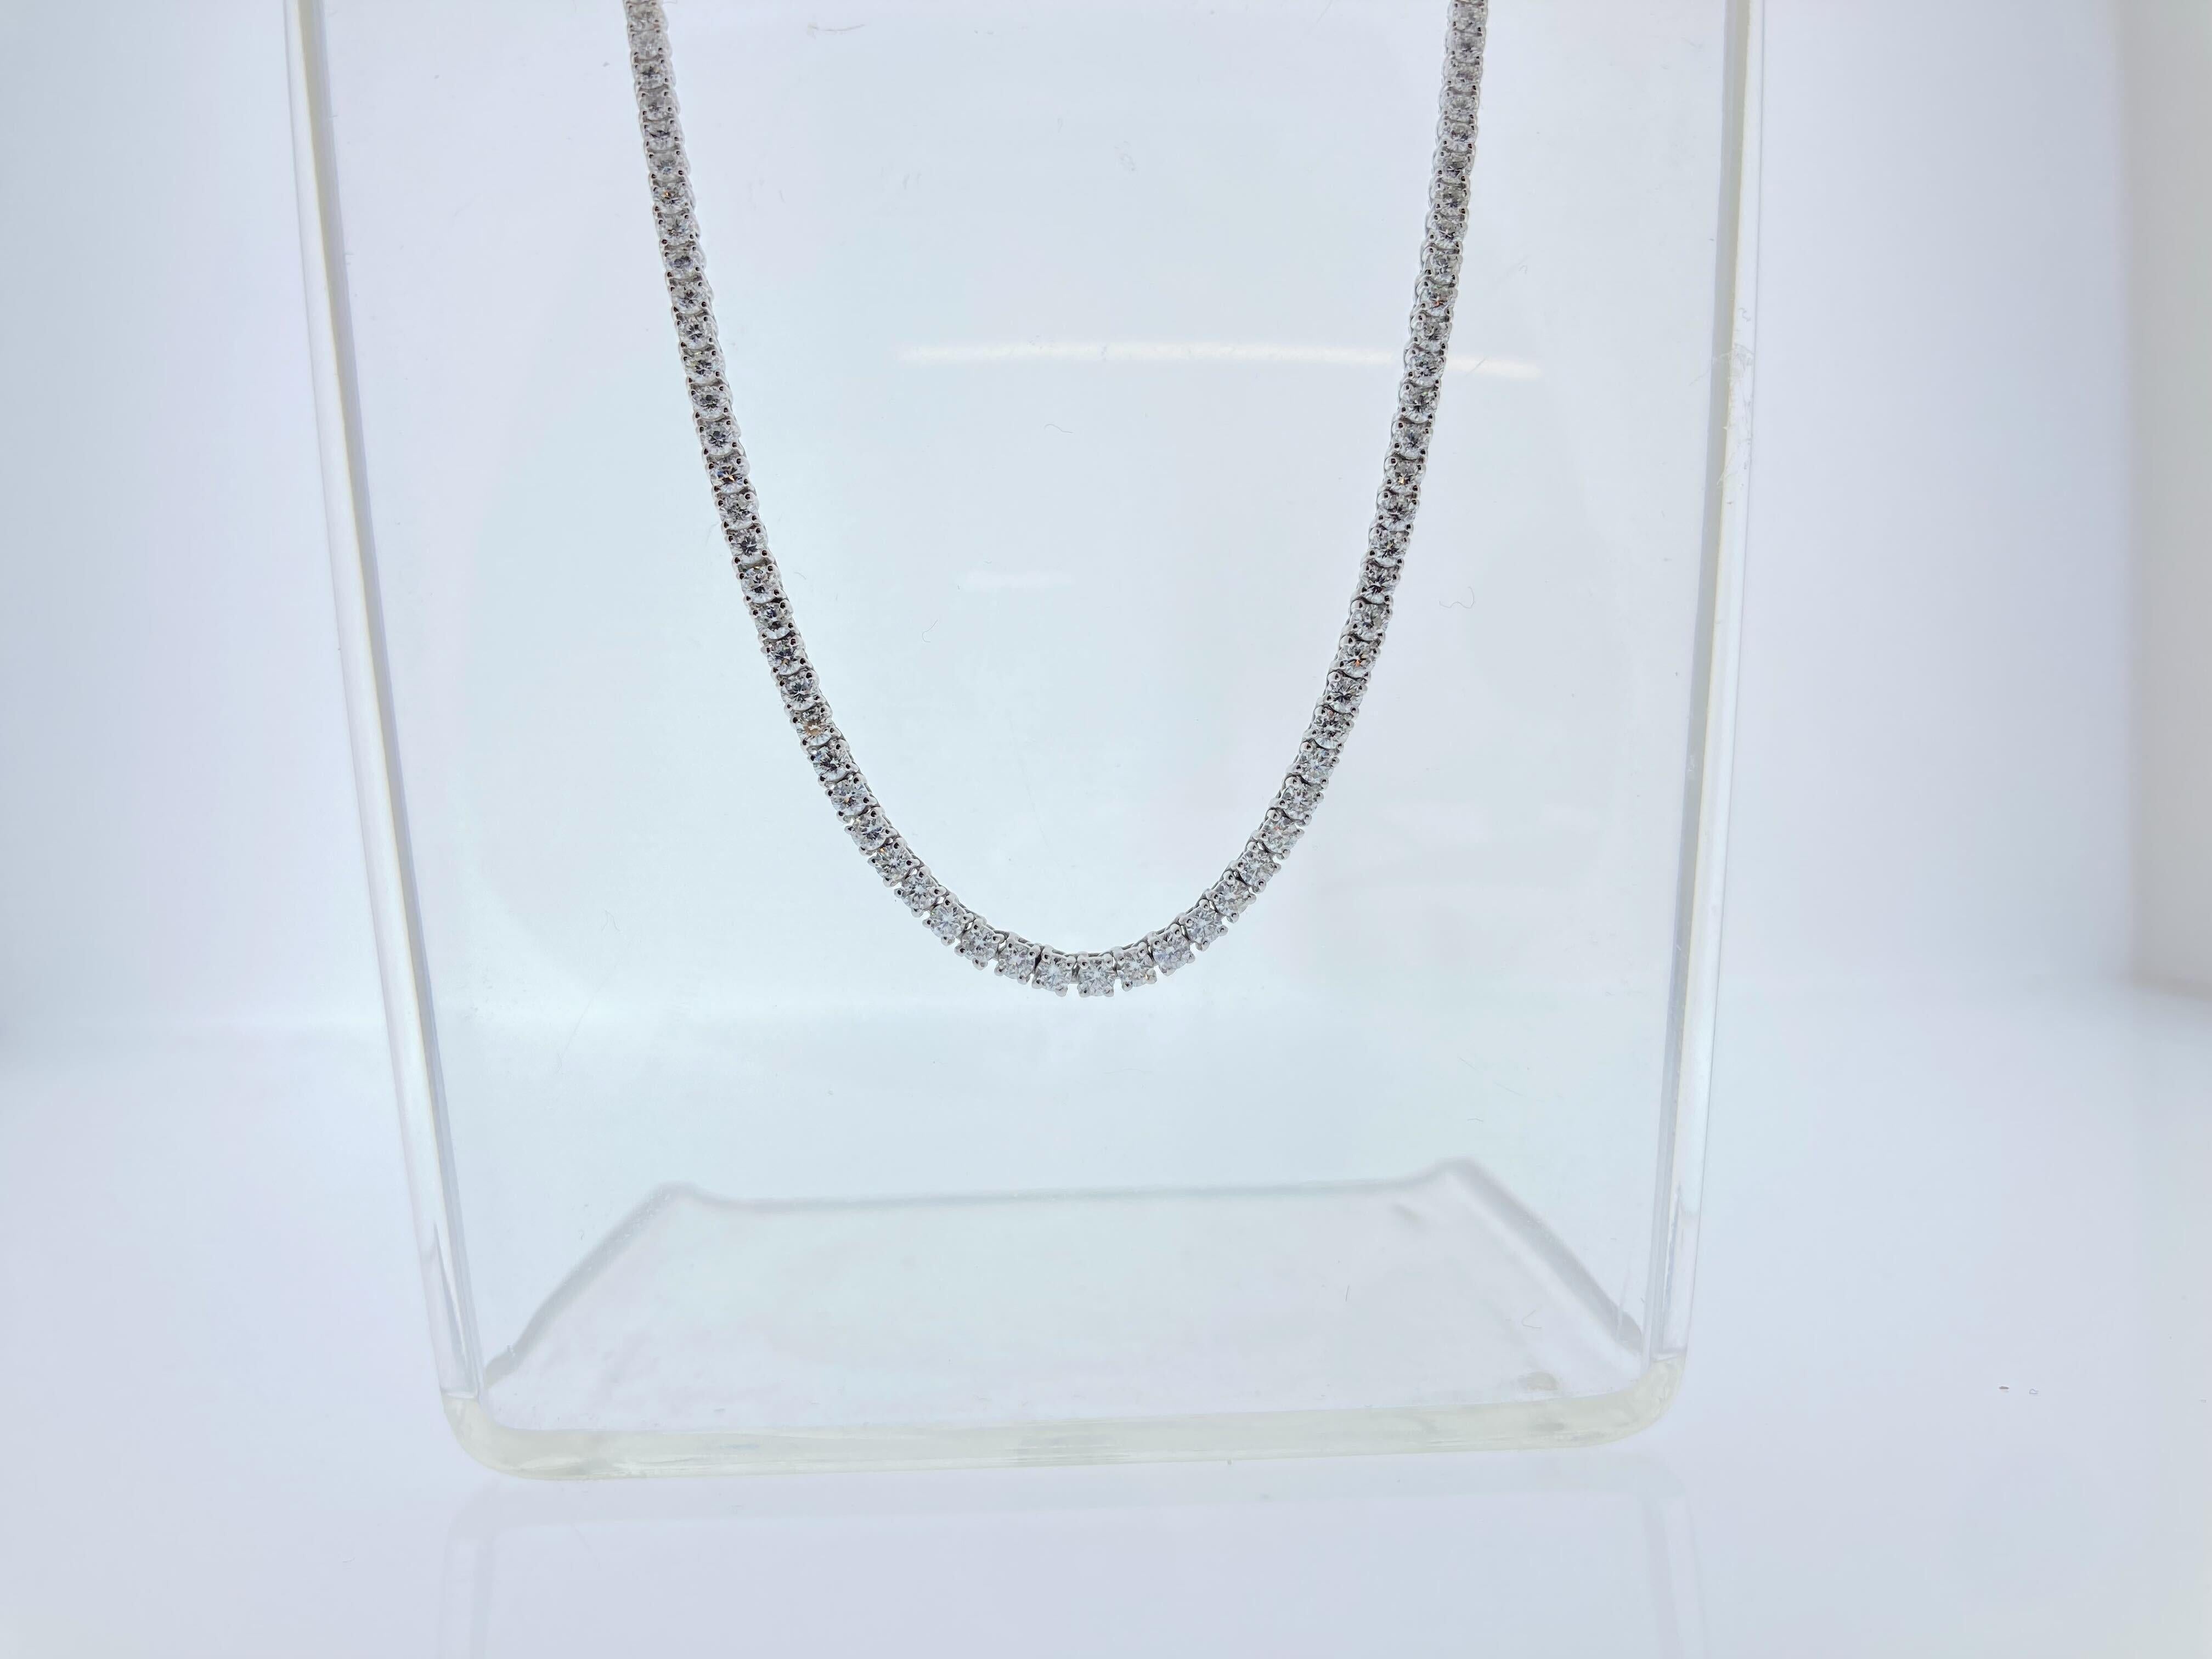 Contemporary 7.00 Carat Round Diamond Tennis Necklaces In 14k White Gold For Sale